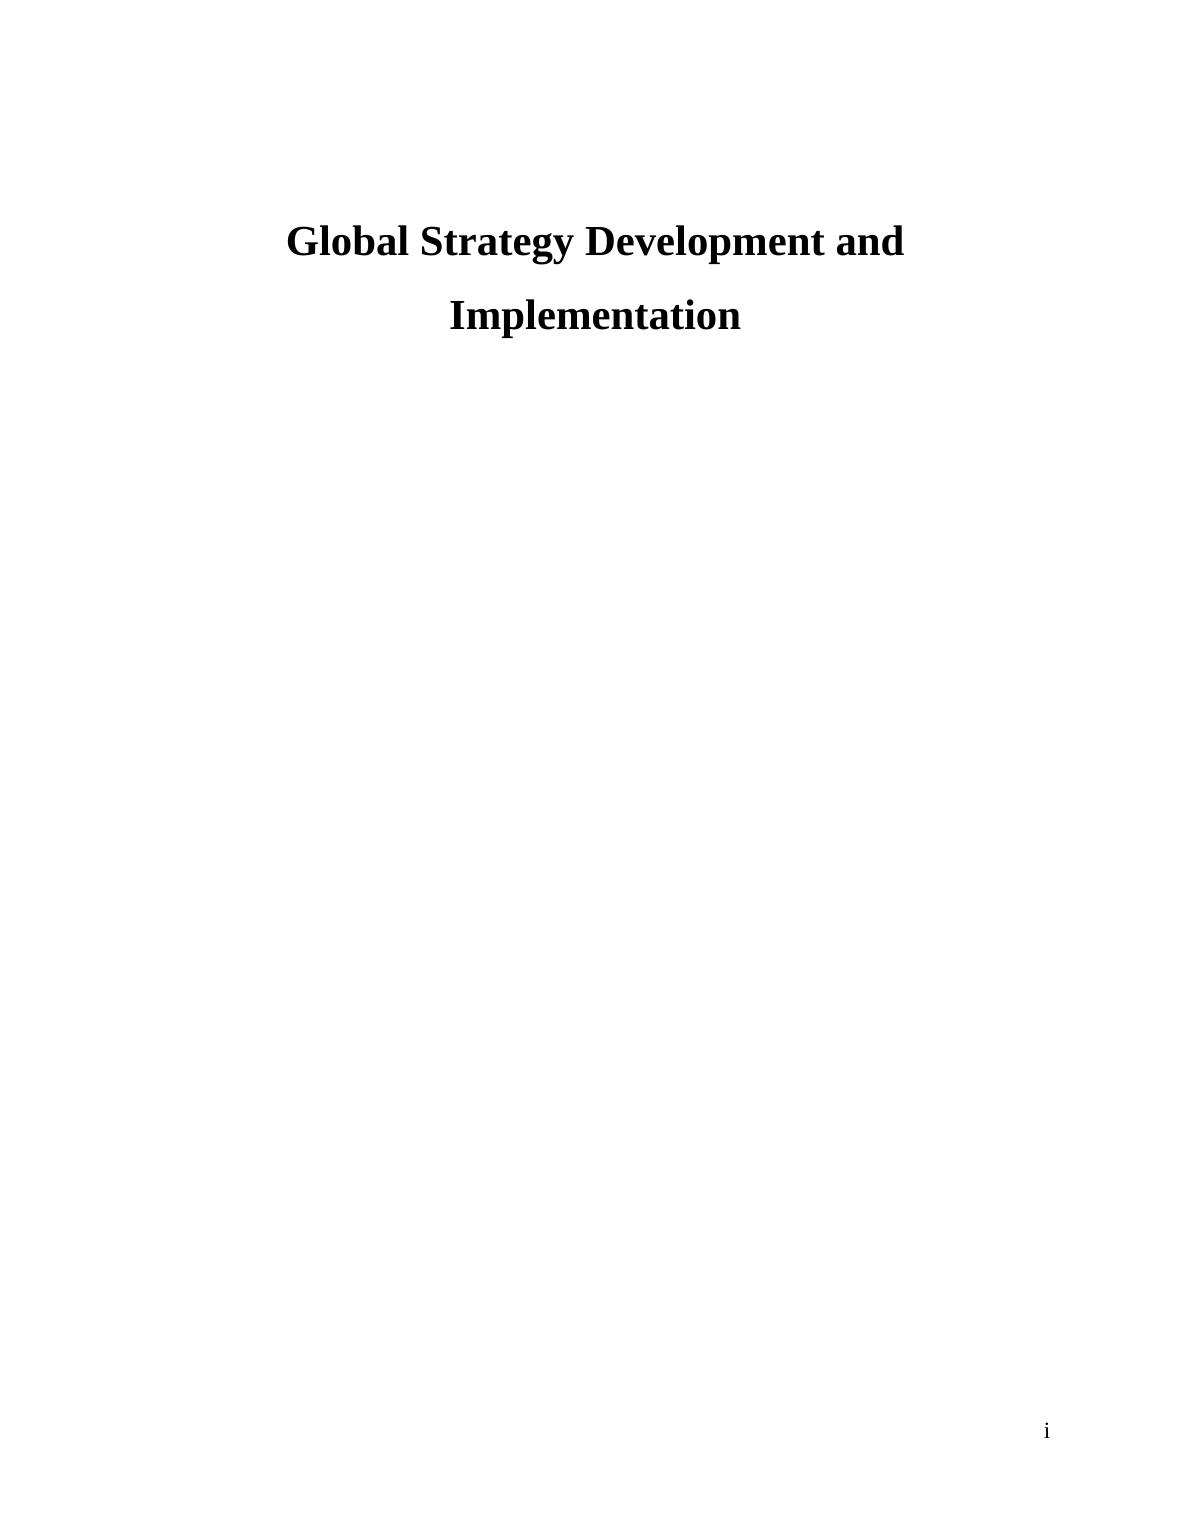 Global Strategy Development And Implementation Assignment 2022